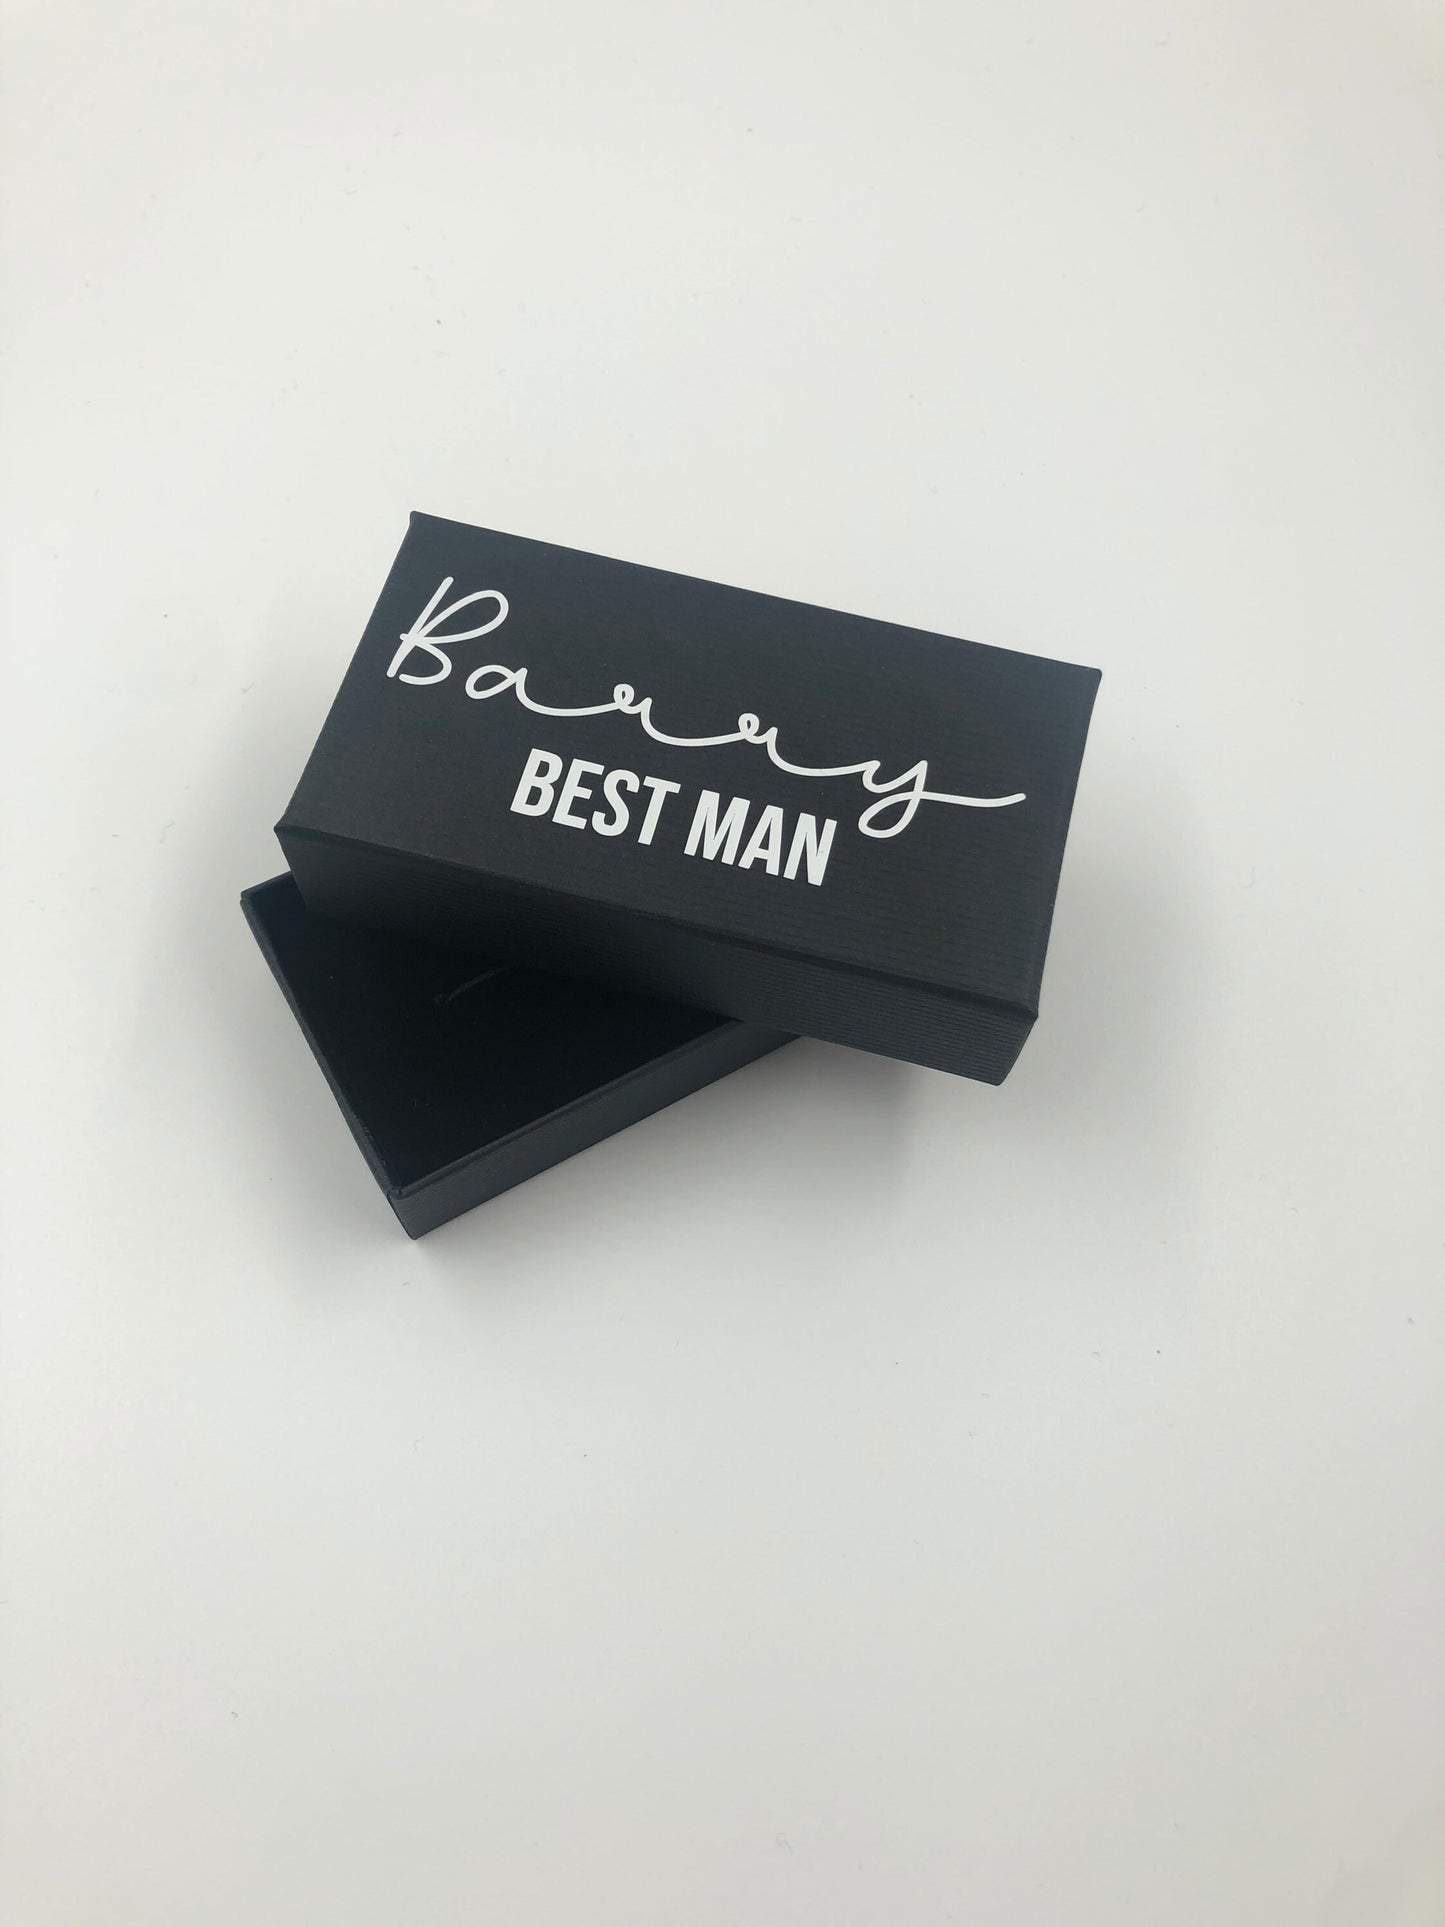 Personalised Groom, Groomsman, Father of the Bride Cufflink Box - Black Keepsake box with white writing - Personalised Name and Role